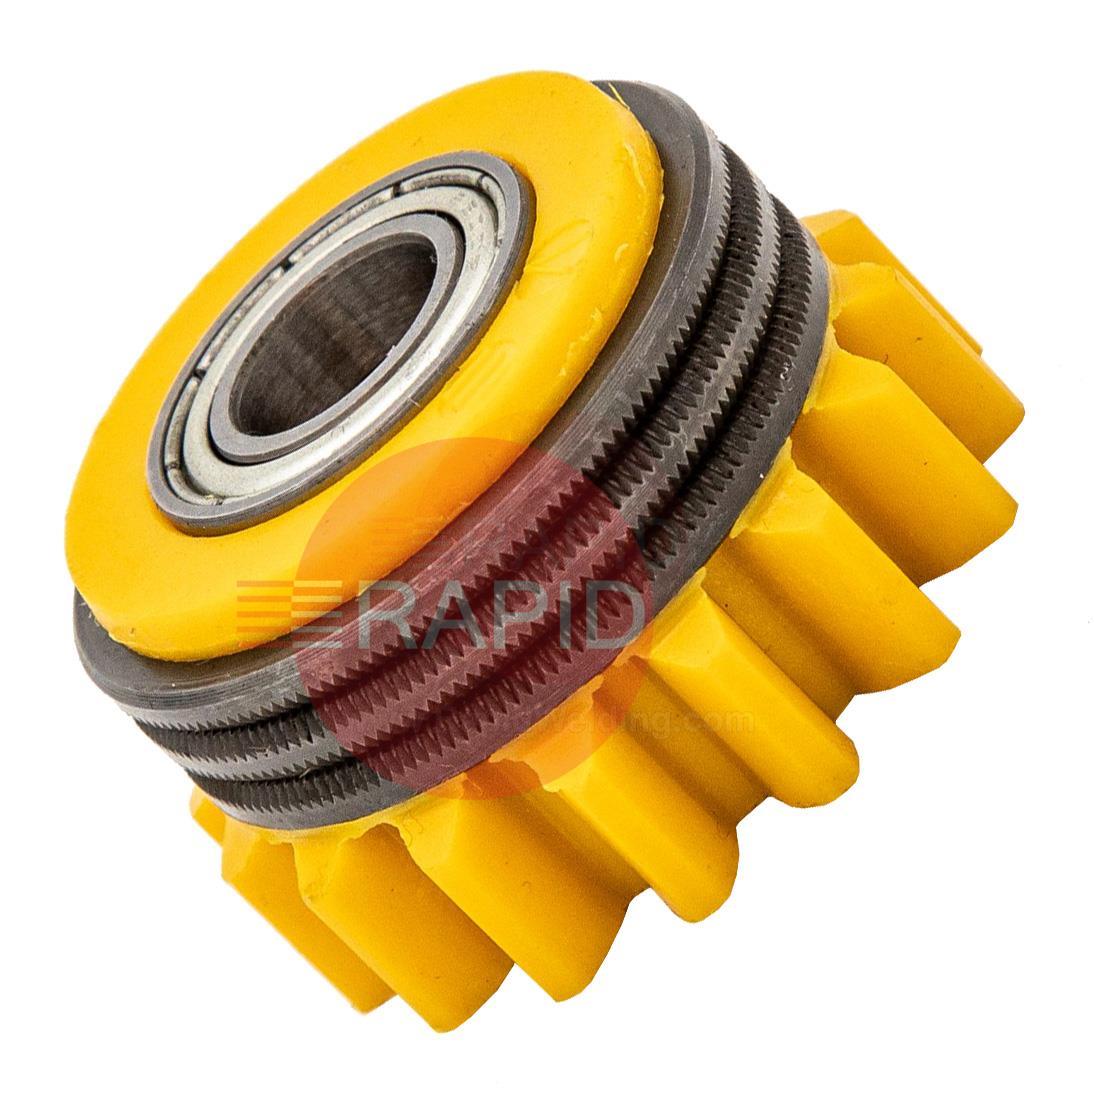 3141130  Kemppi Bearing Feed Roll. Yellow,1.6mm Knurled Groove For Cored Wire